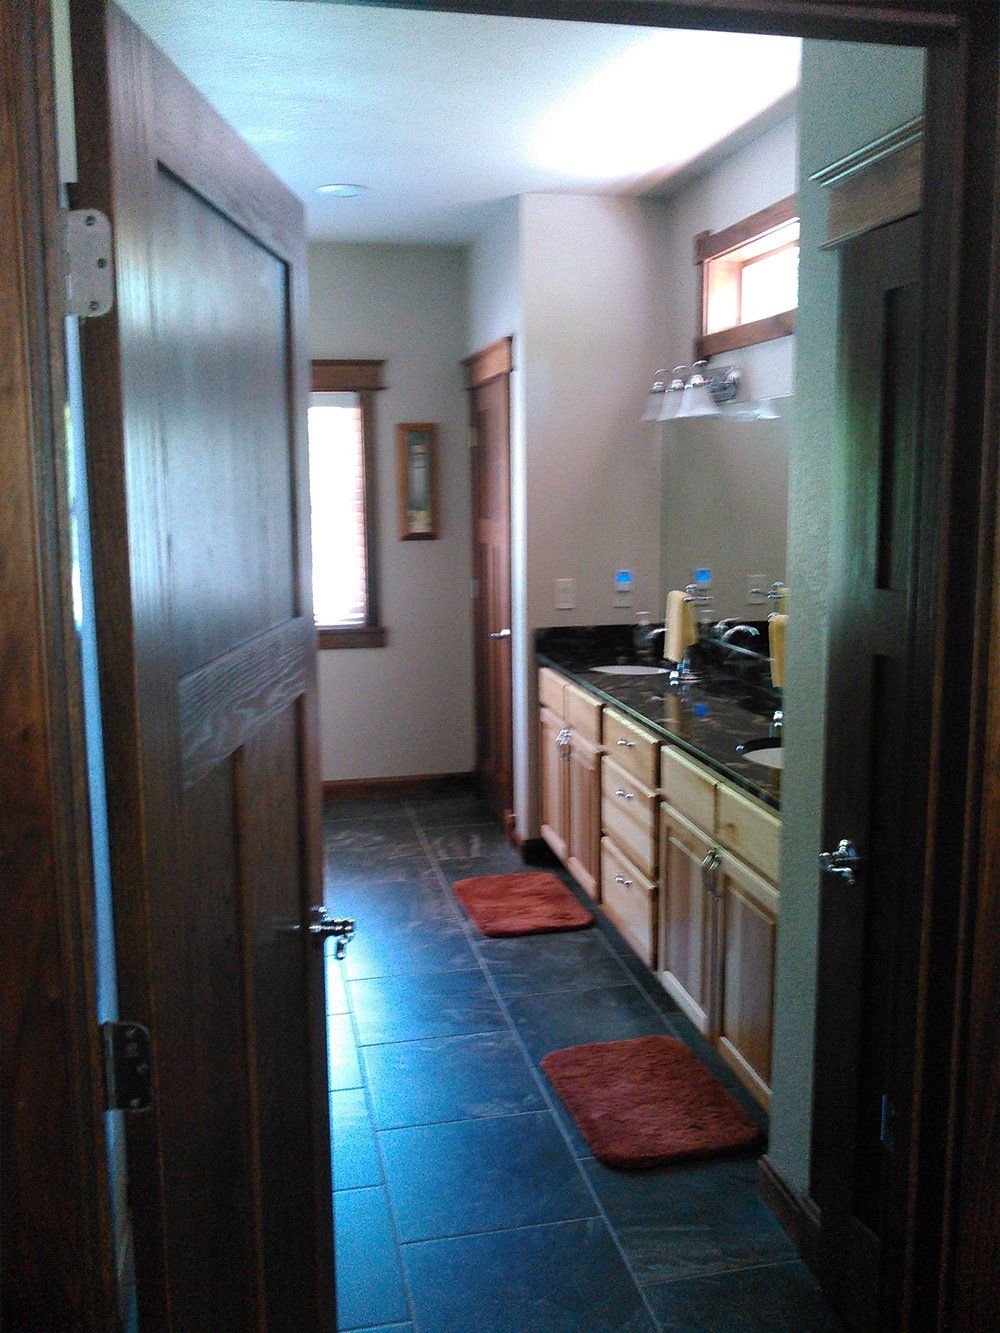 View of interior bathroom -  Remodeling Services in Slippery Rock, PA